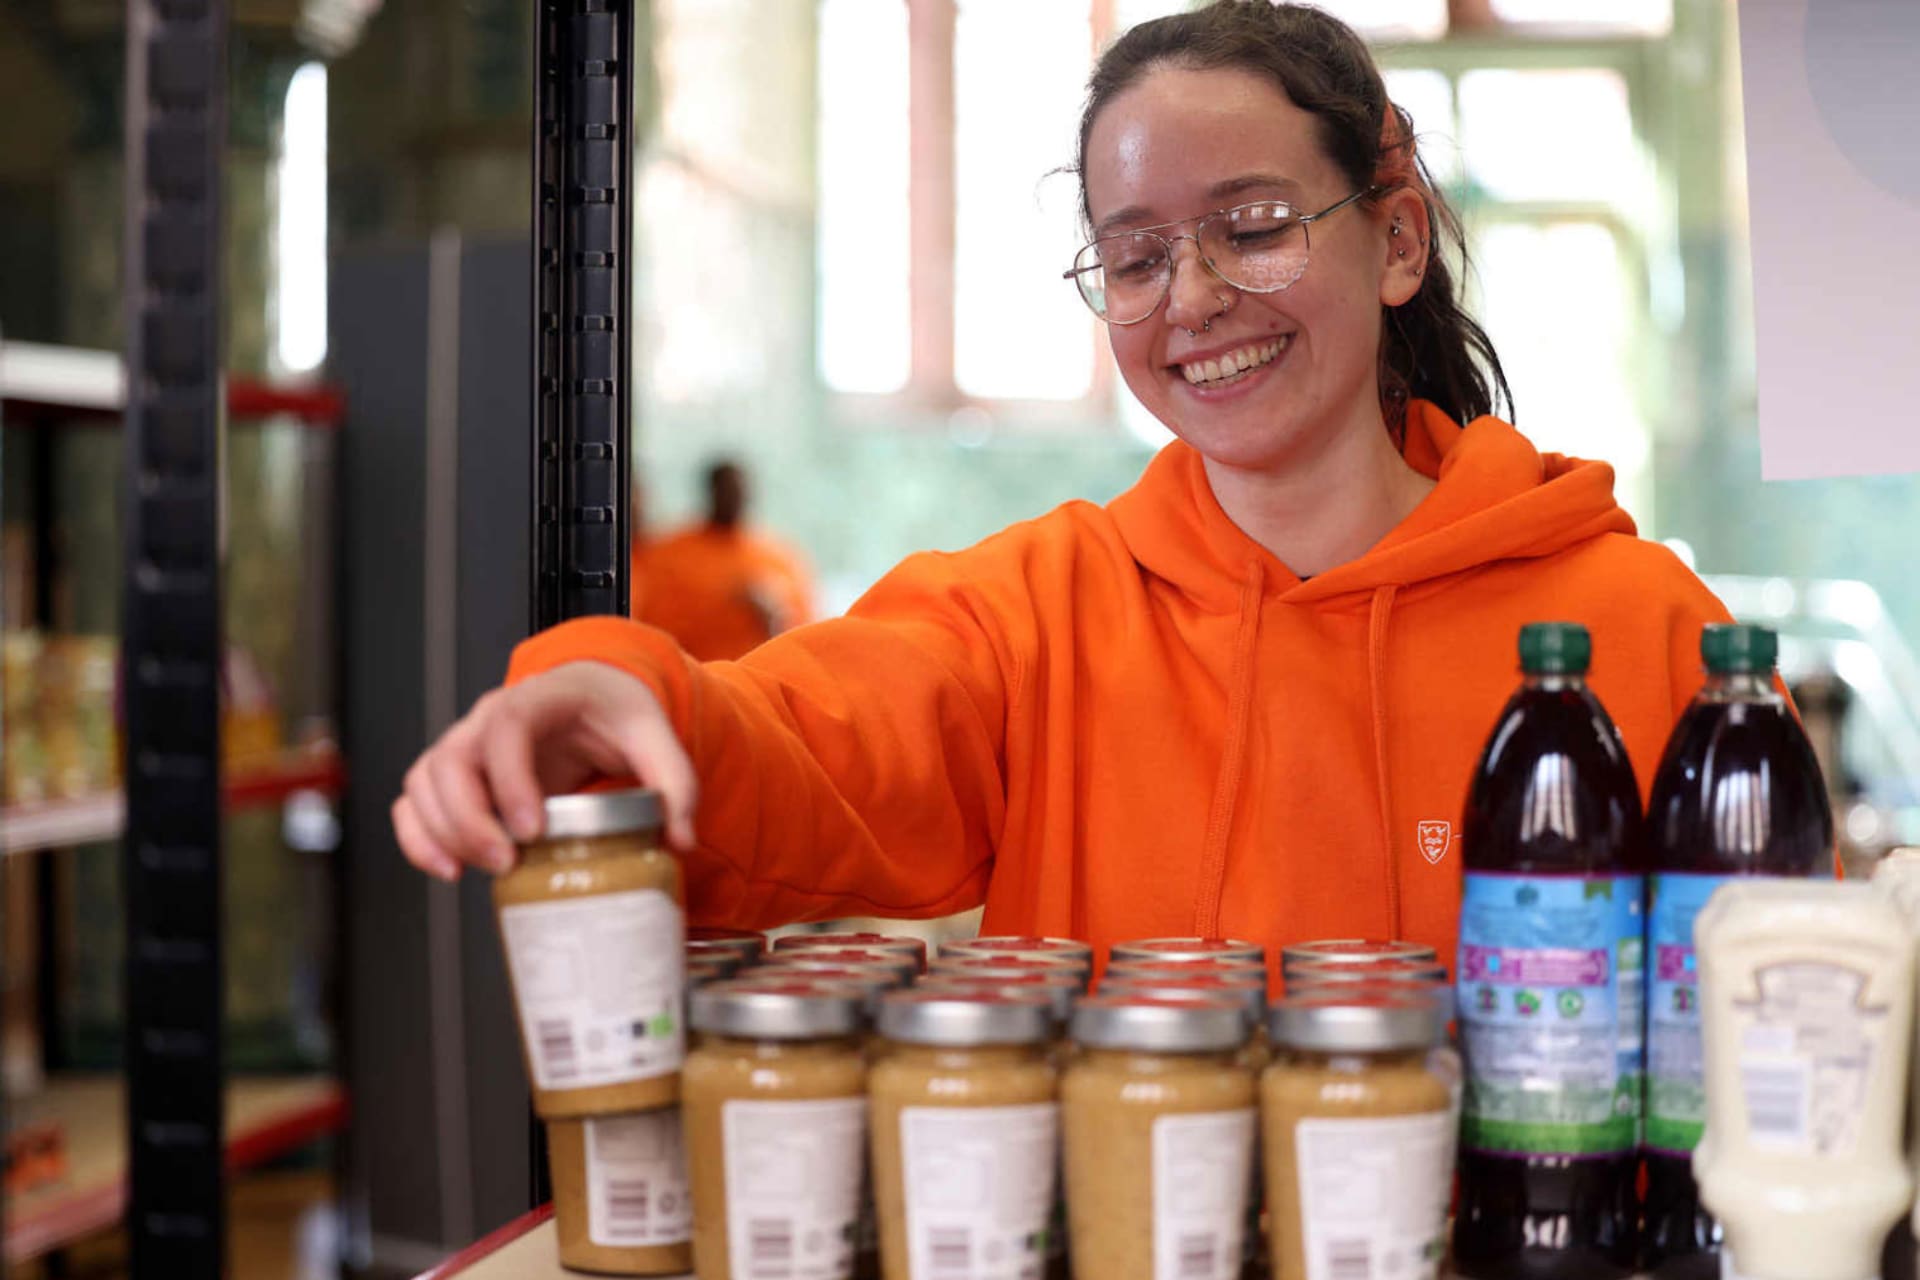 A young woman wearing glasses, smiling as she picks a jar of peanut butter out from a row of jars.